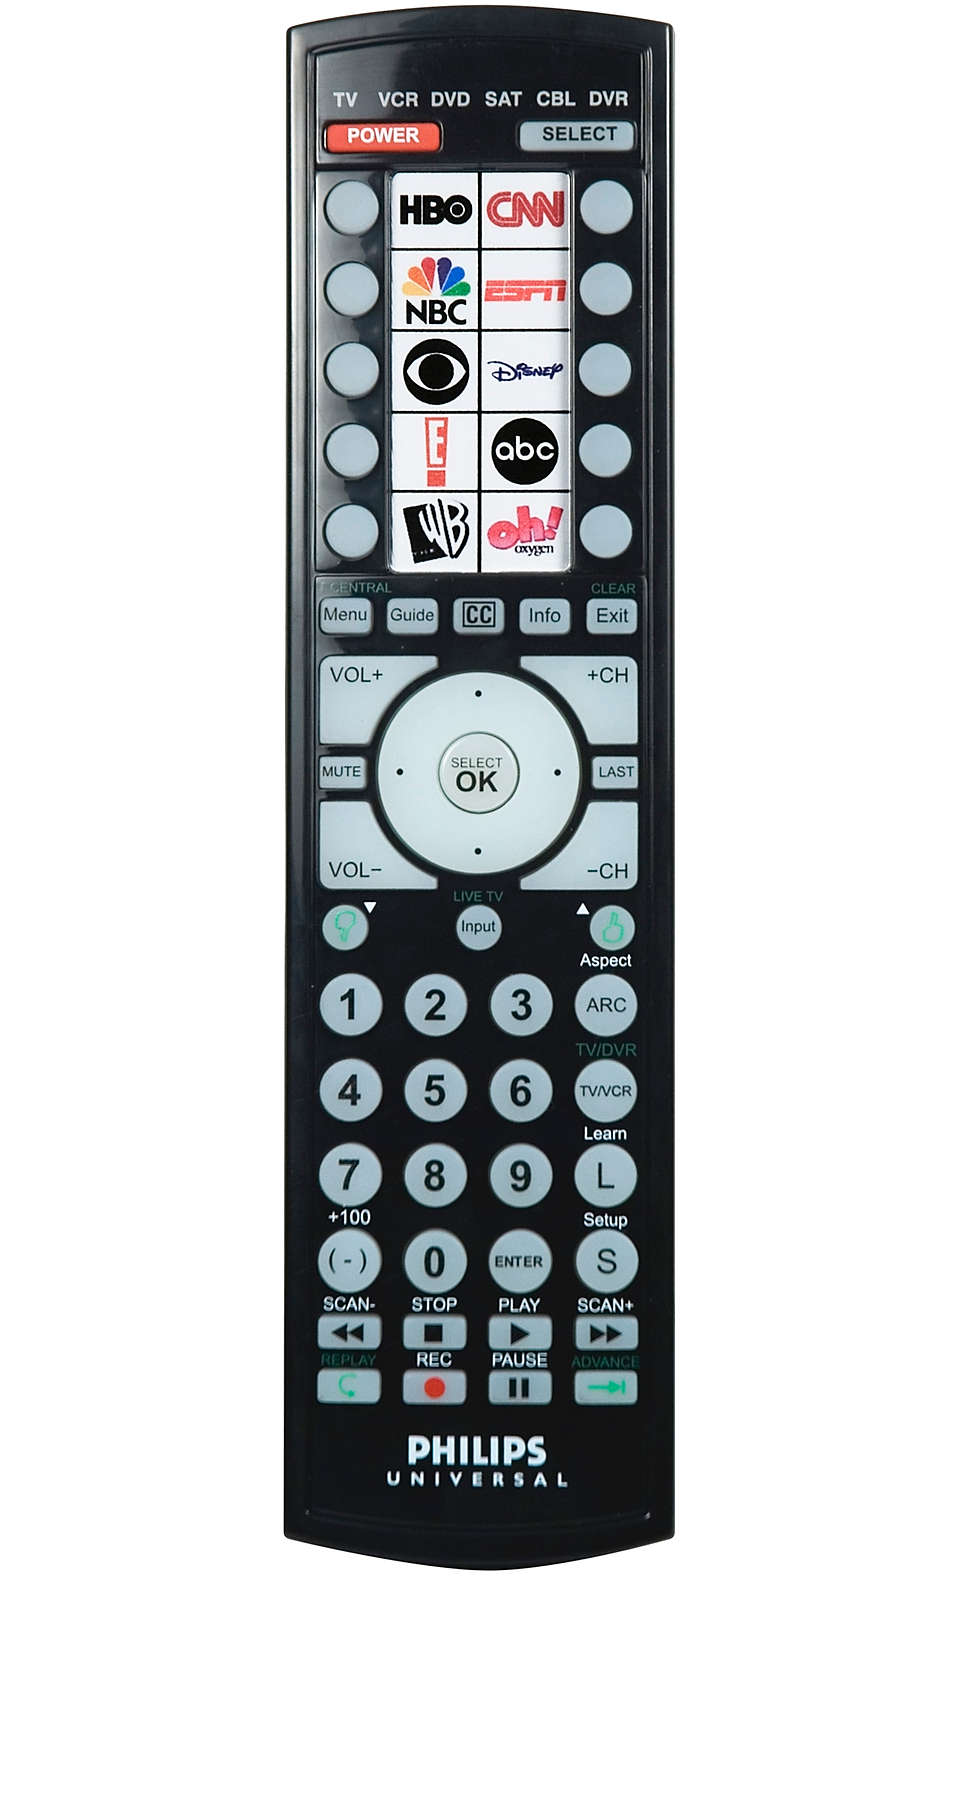 Perfect replacement Universal remote control SRU4106/27 | Philips